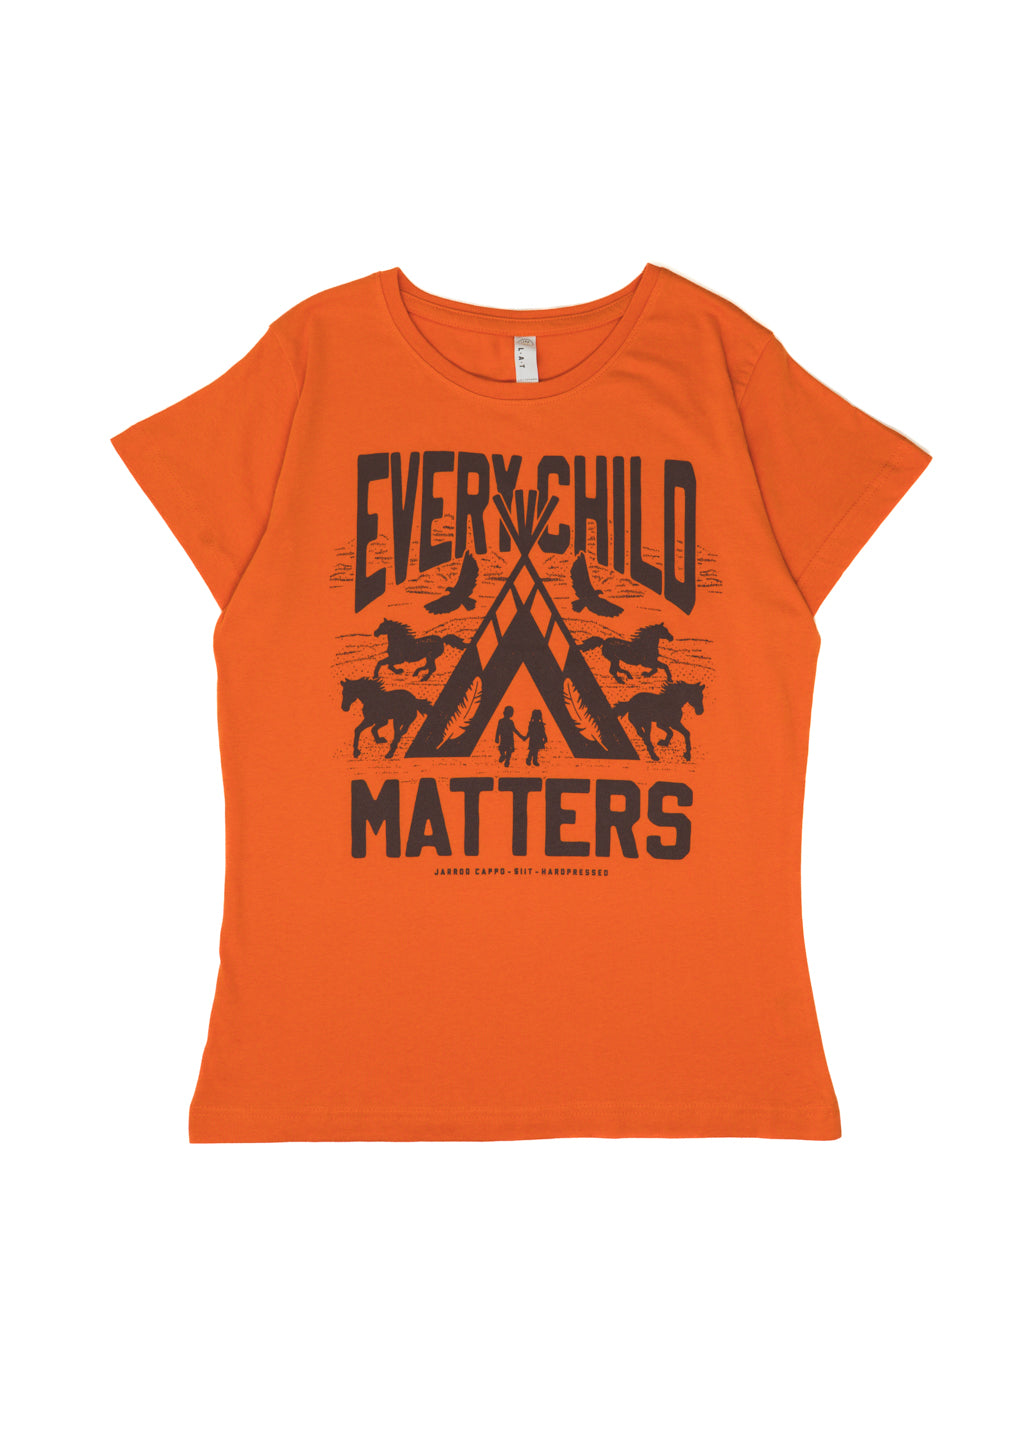 Every Child Matters Tee by Jarrod Cappo | Orange | Unisex and Ladies